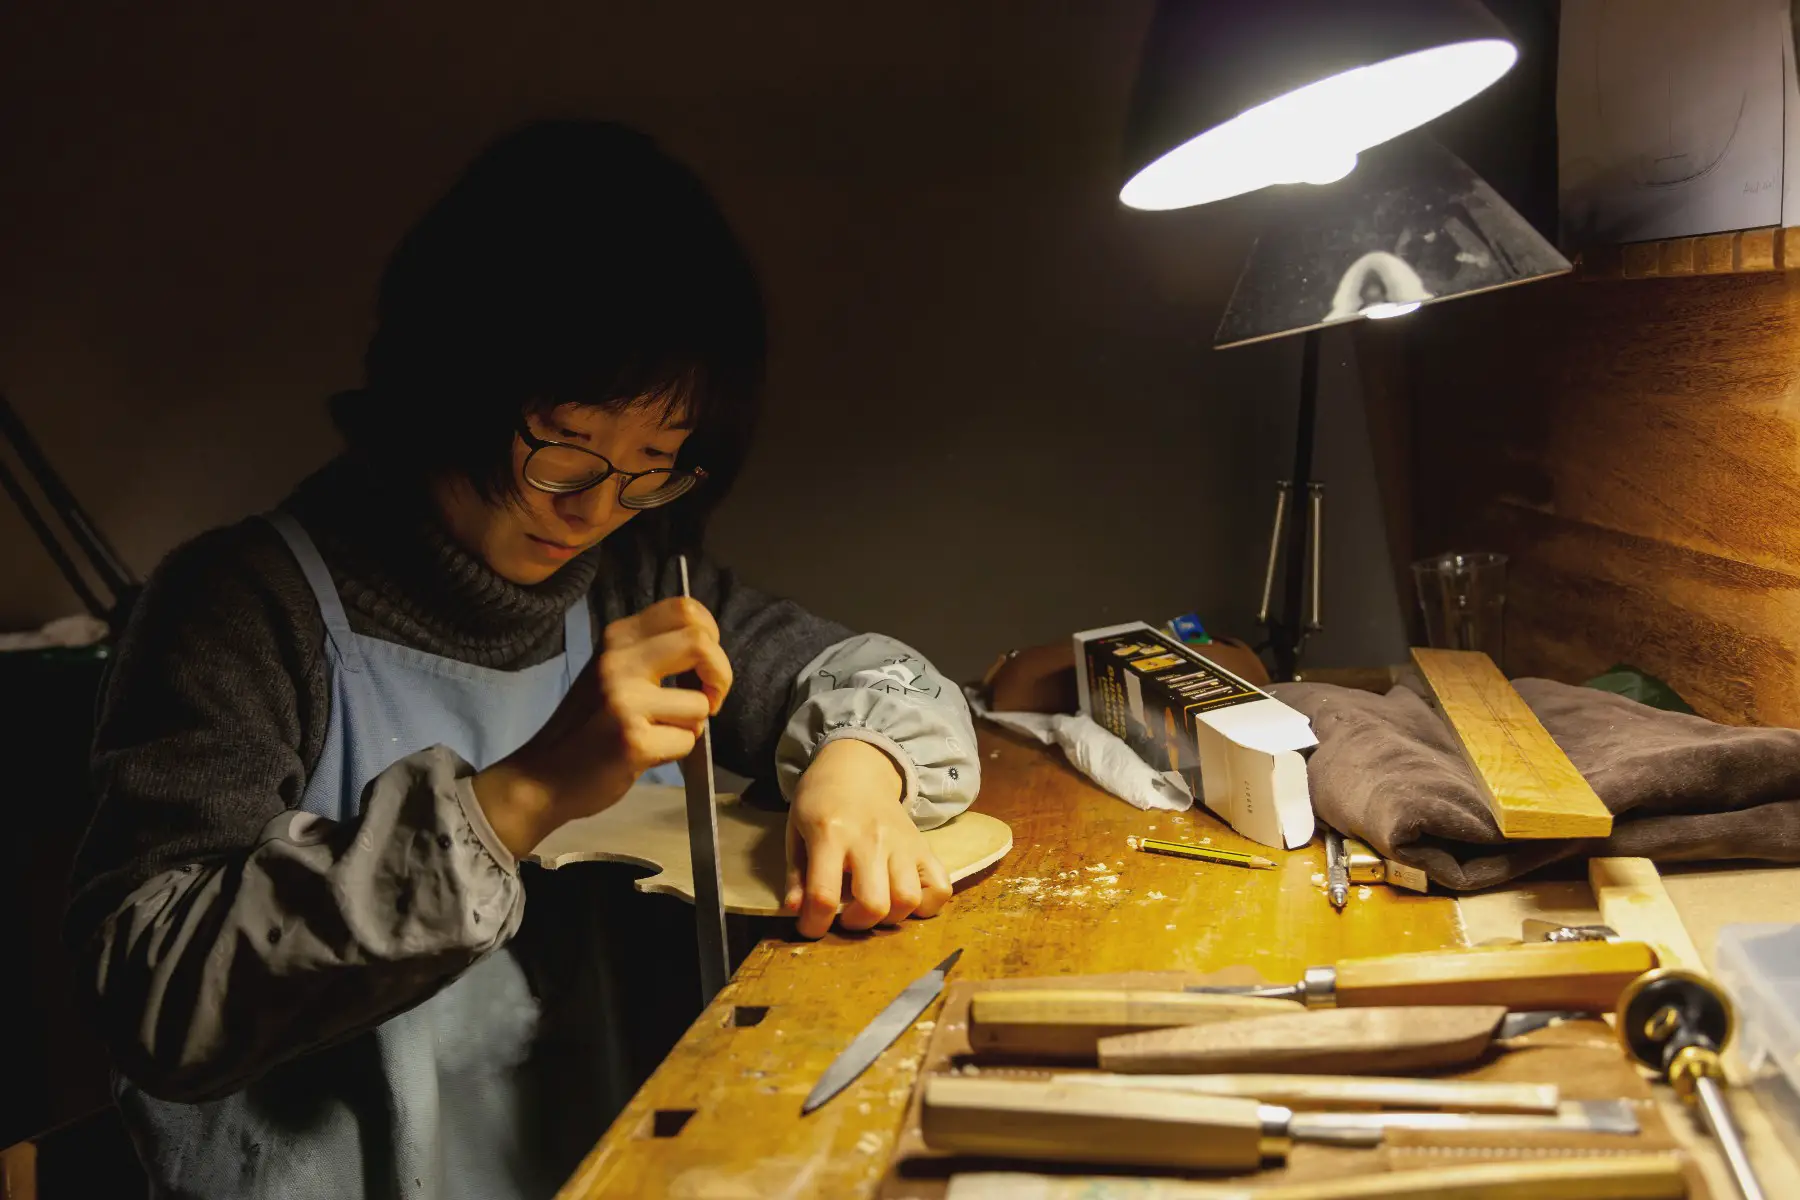 Craftsperson at a work bench concentrating on sanding the back of a violin.